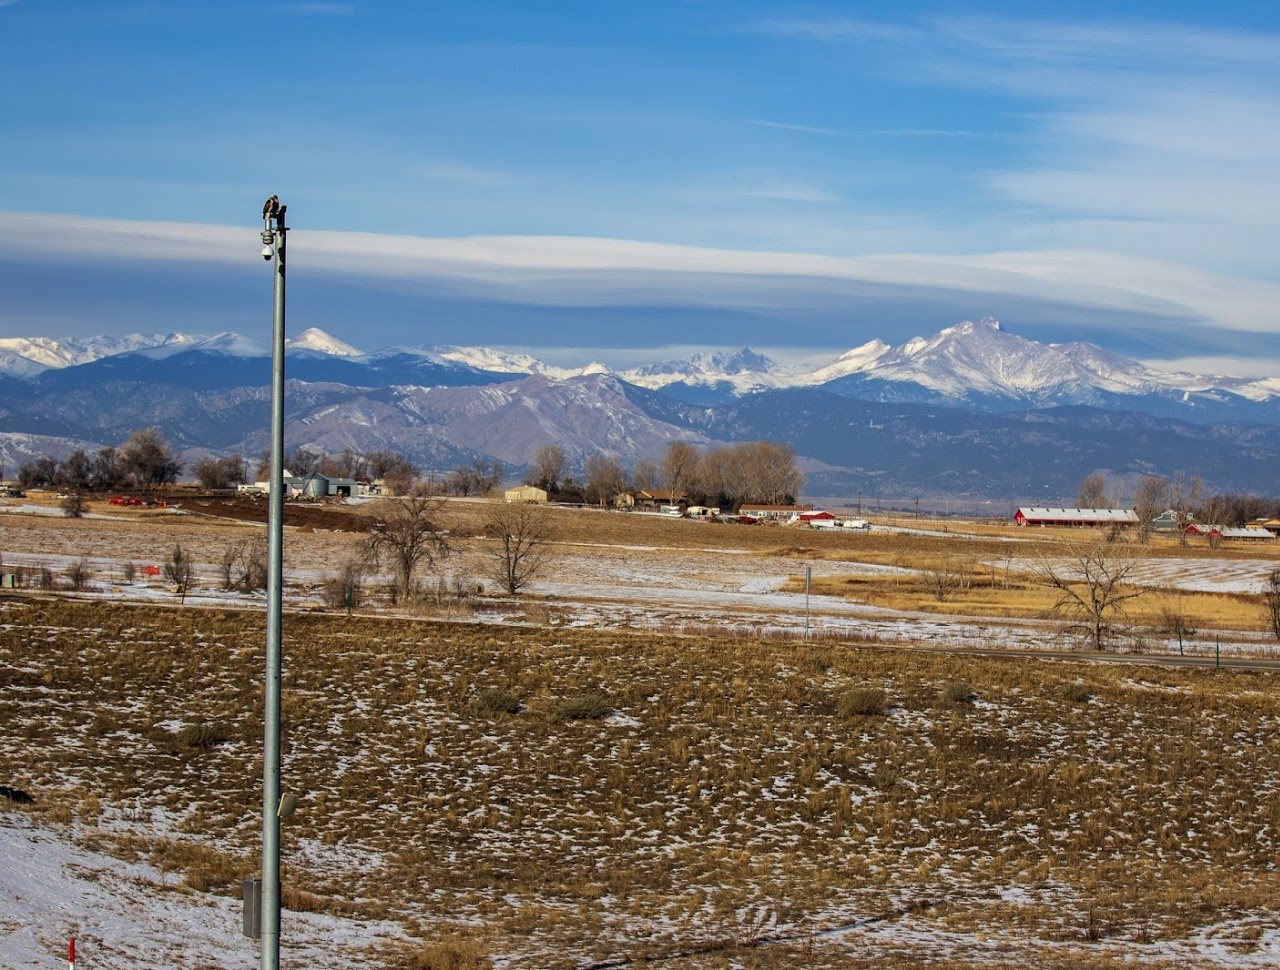 CCTV with mountains in the background.jpg detail image